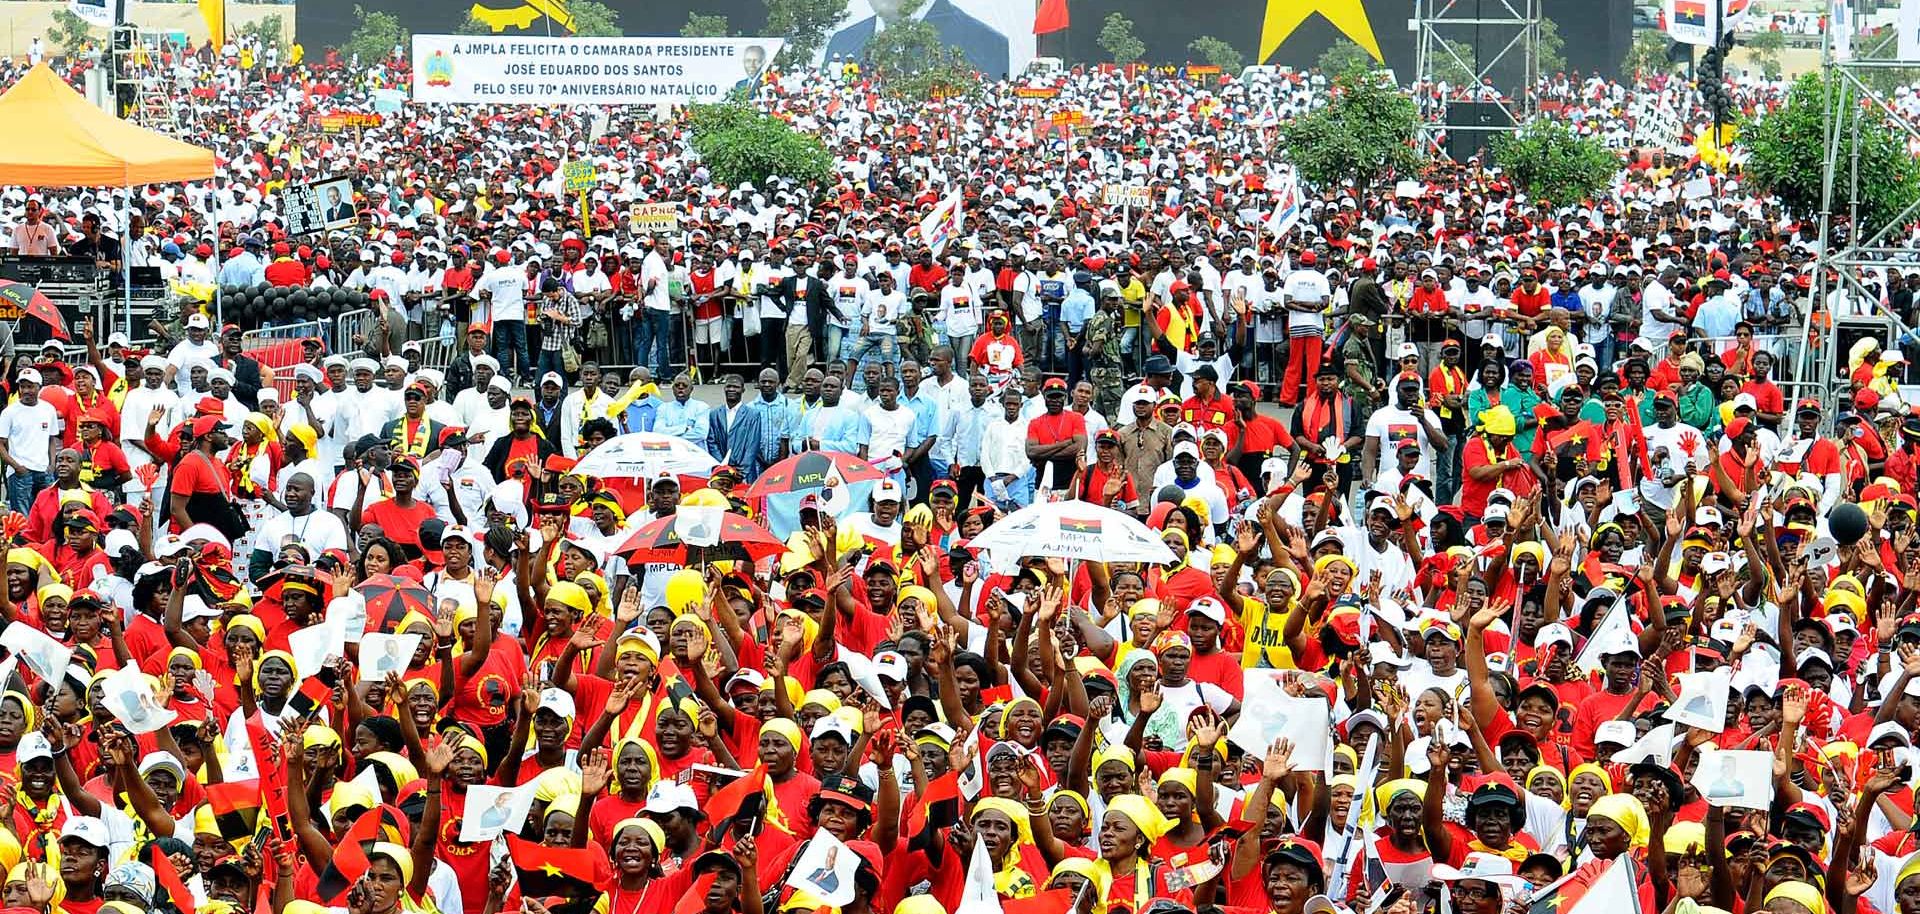 Who Will Be Angola's Next President?